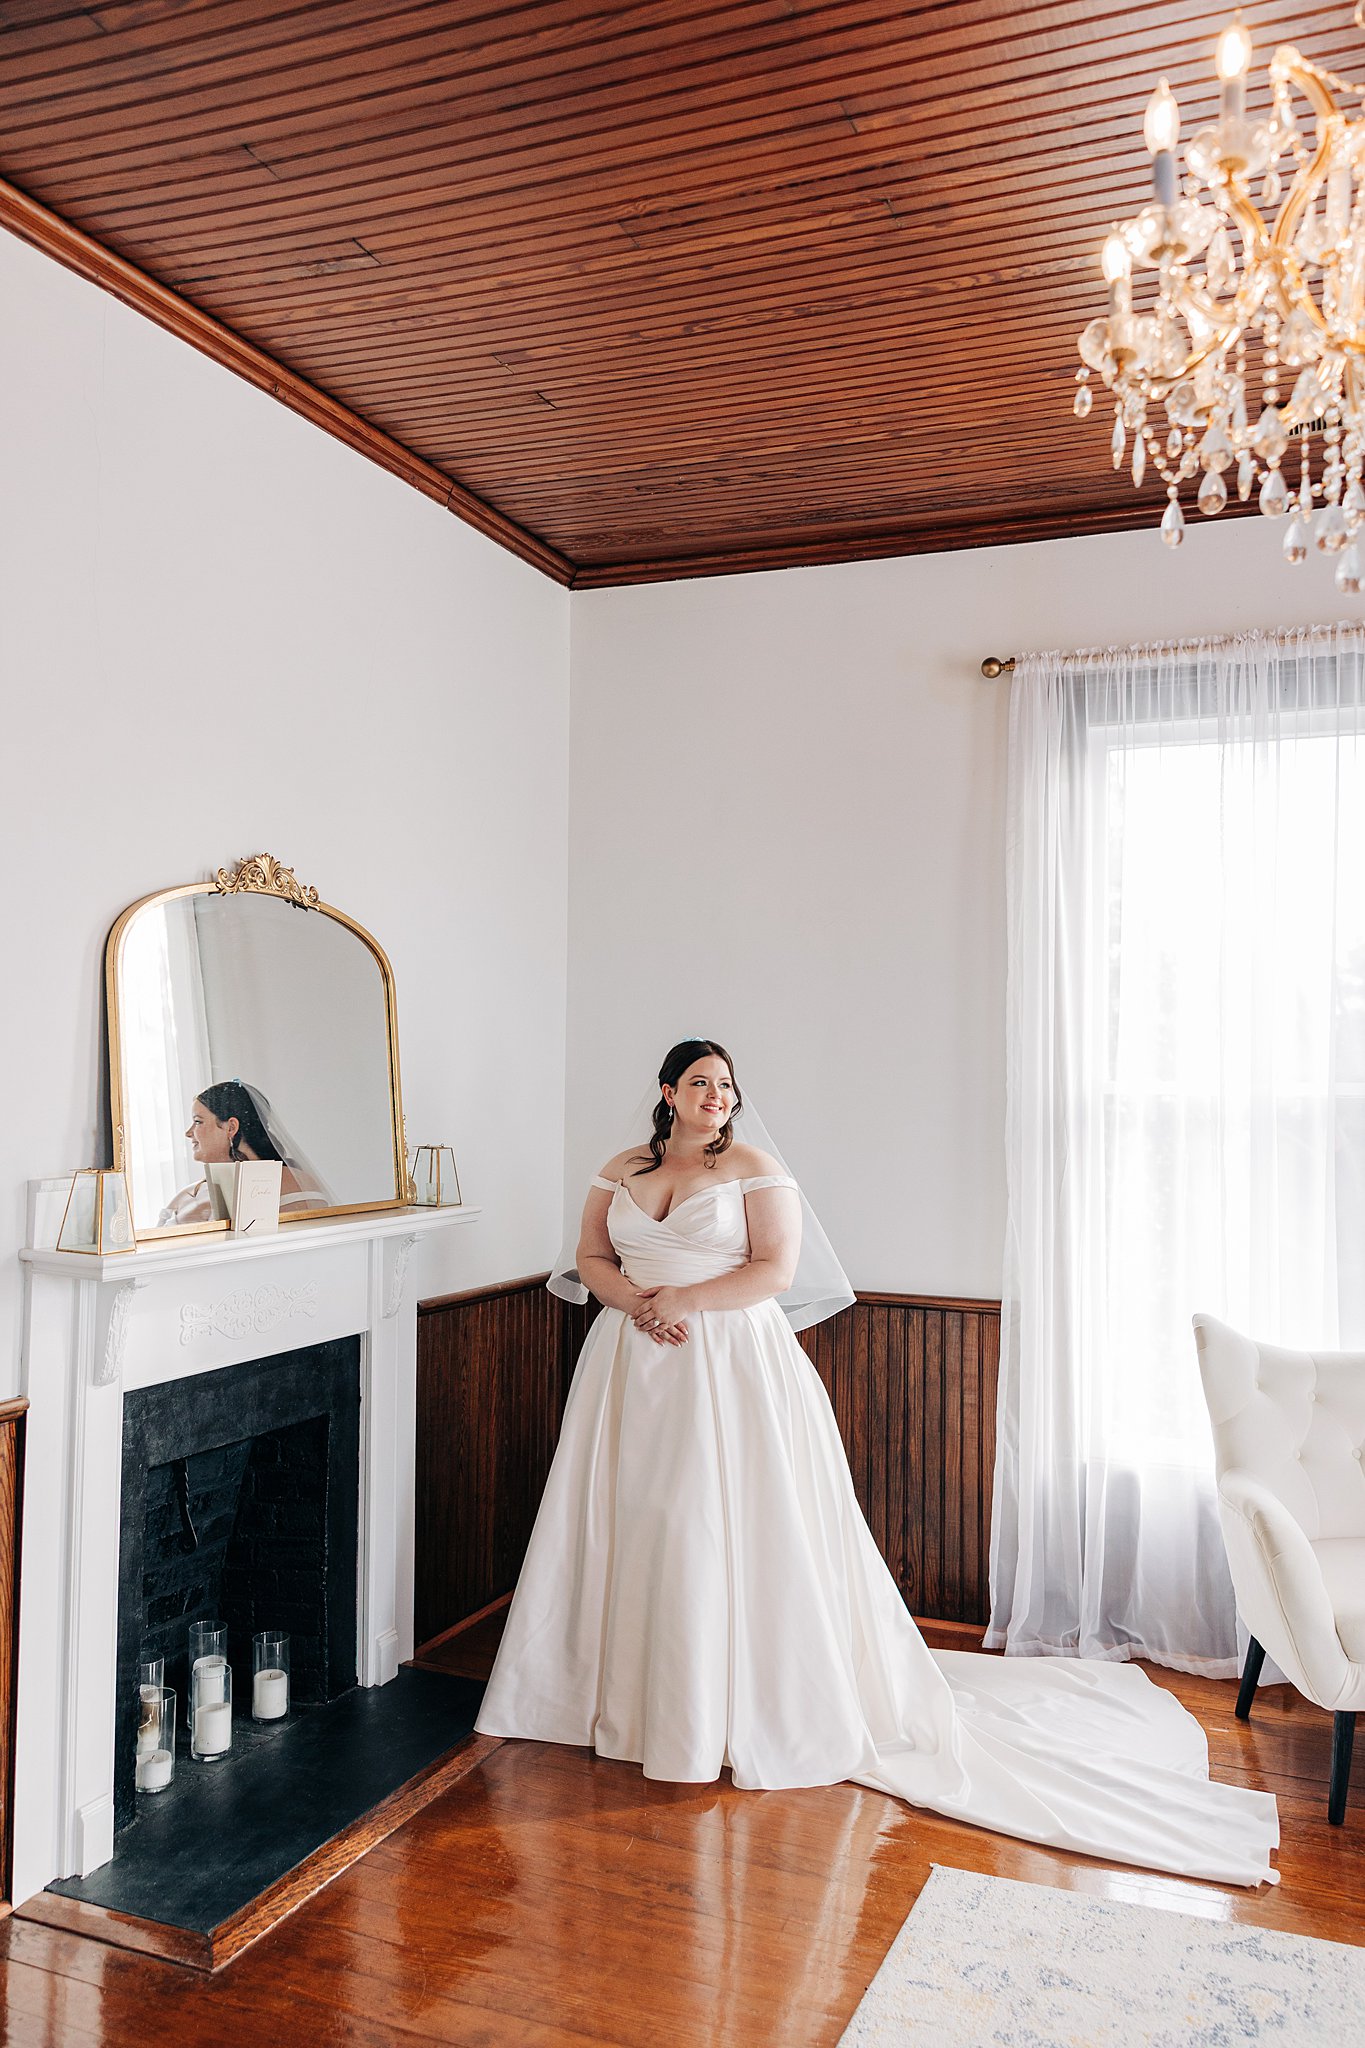 A bride stands in a getting ready room by a fireplace smiling over her shoulder